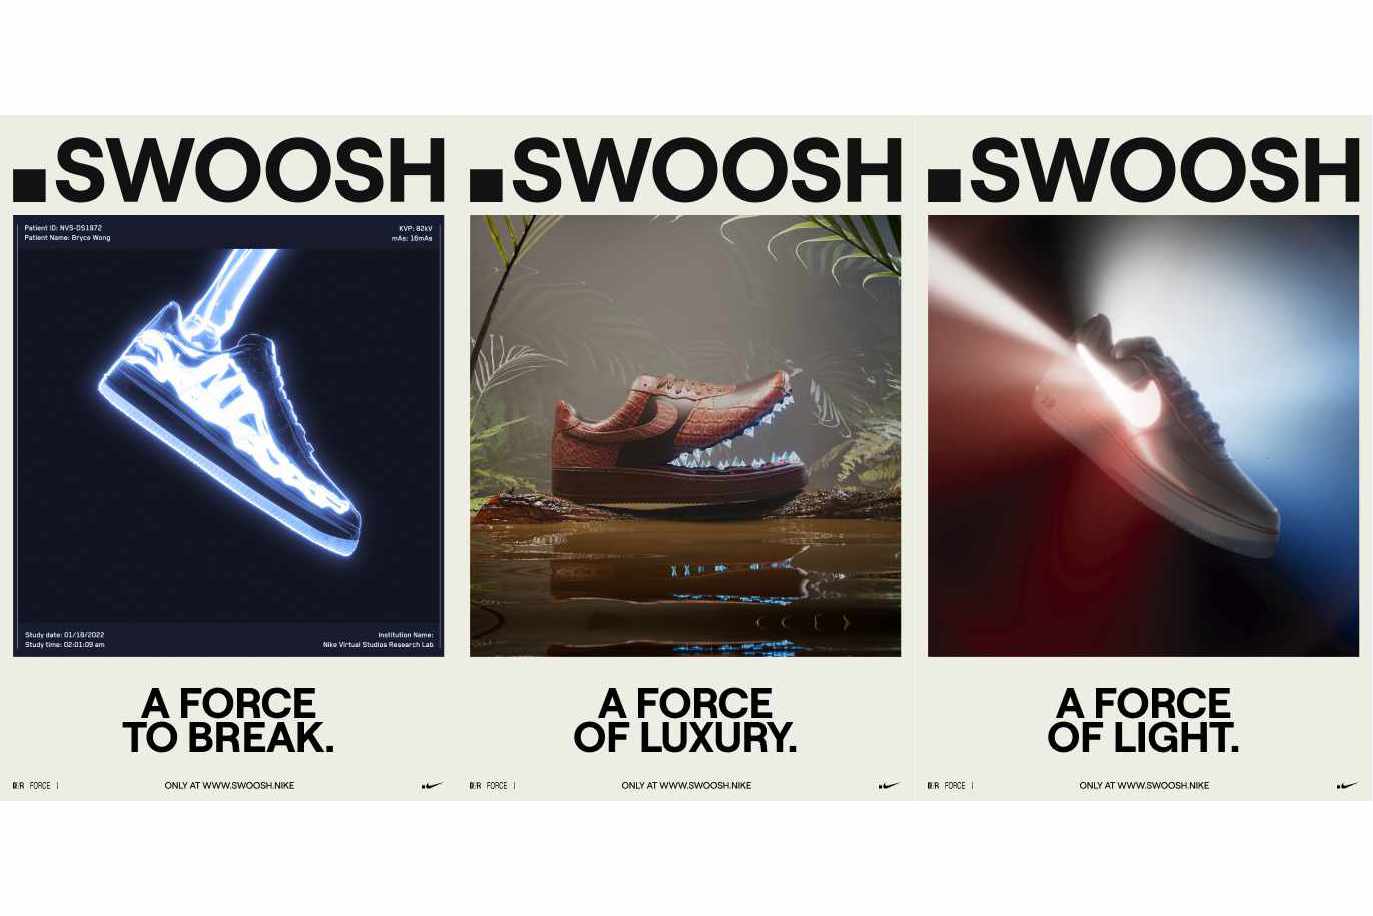 Nike Launches Its Our Force 1 Collection Under New .SWOOSH Platform